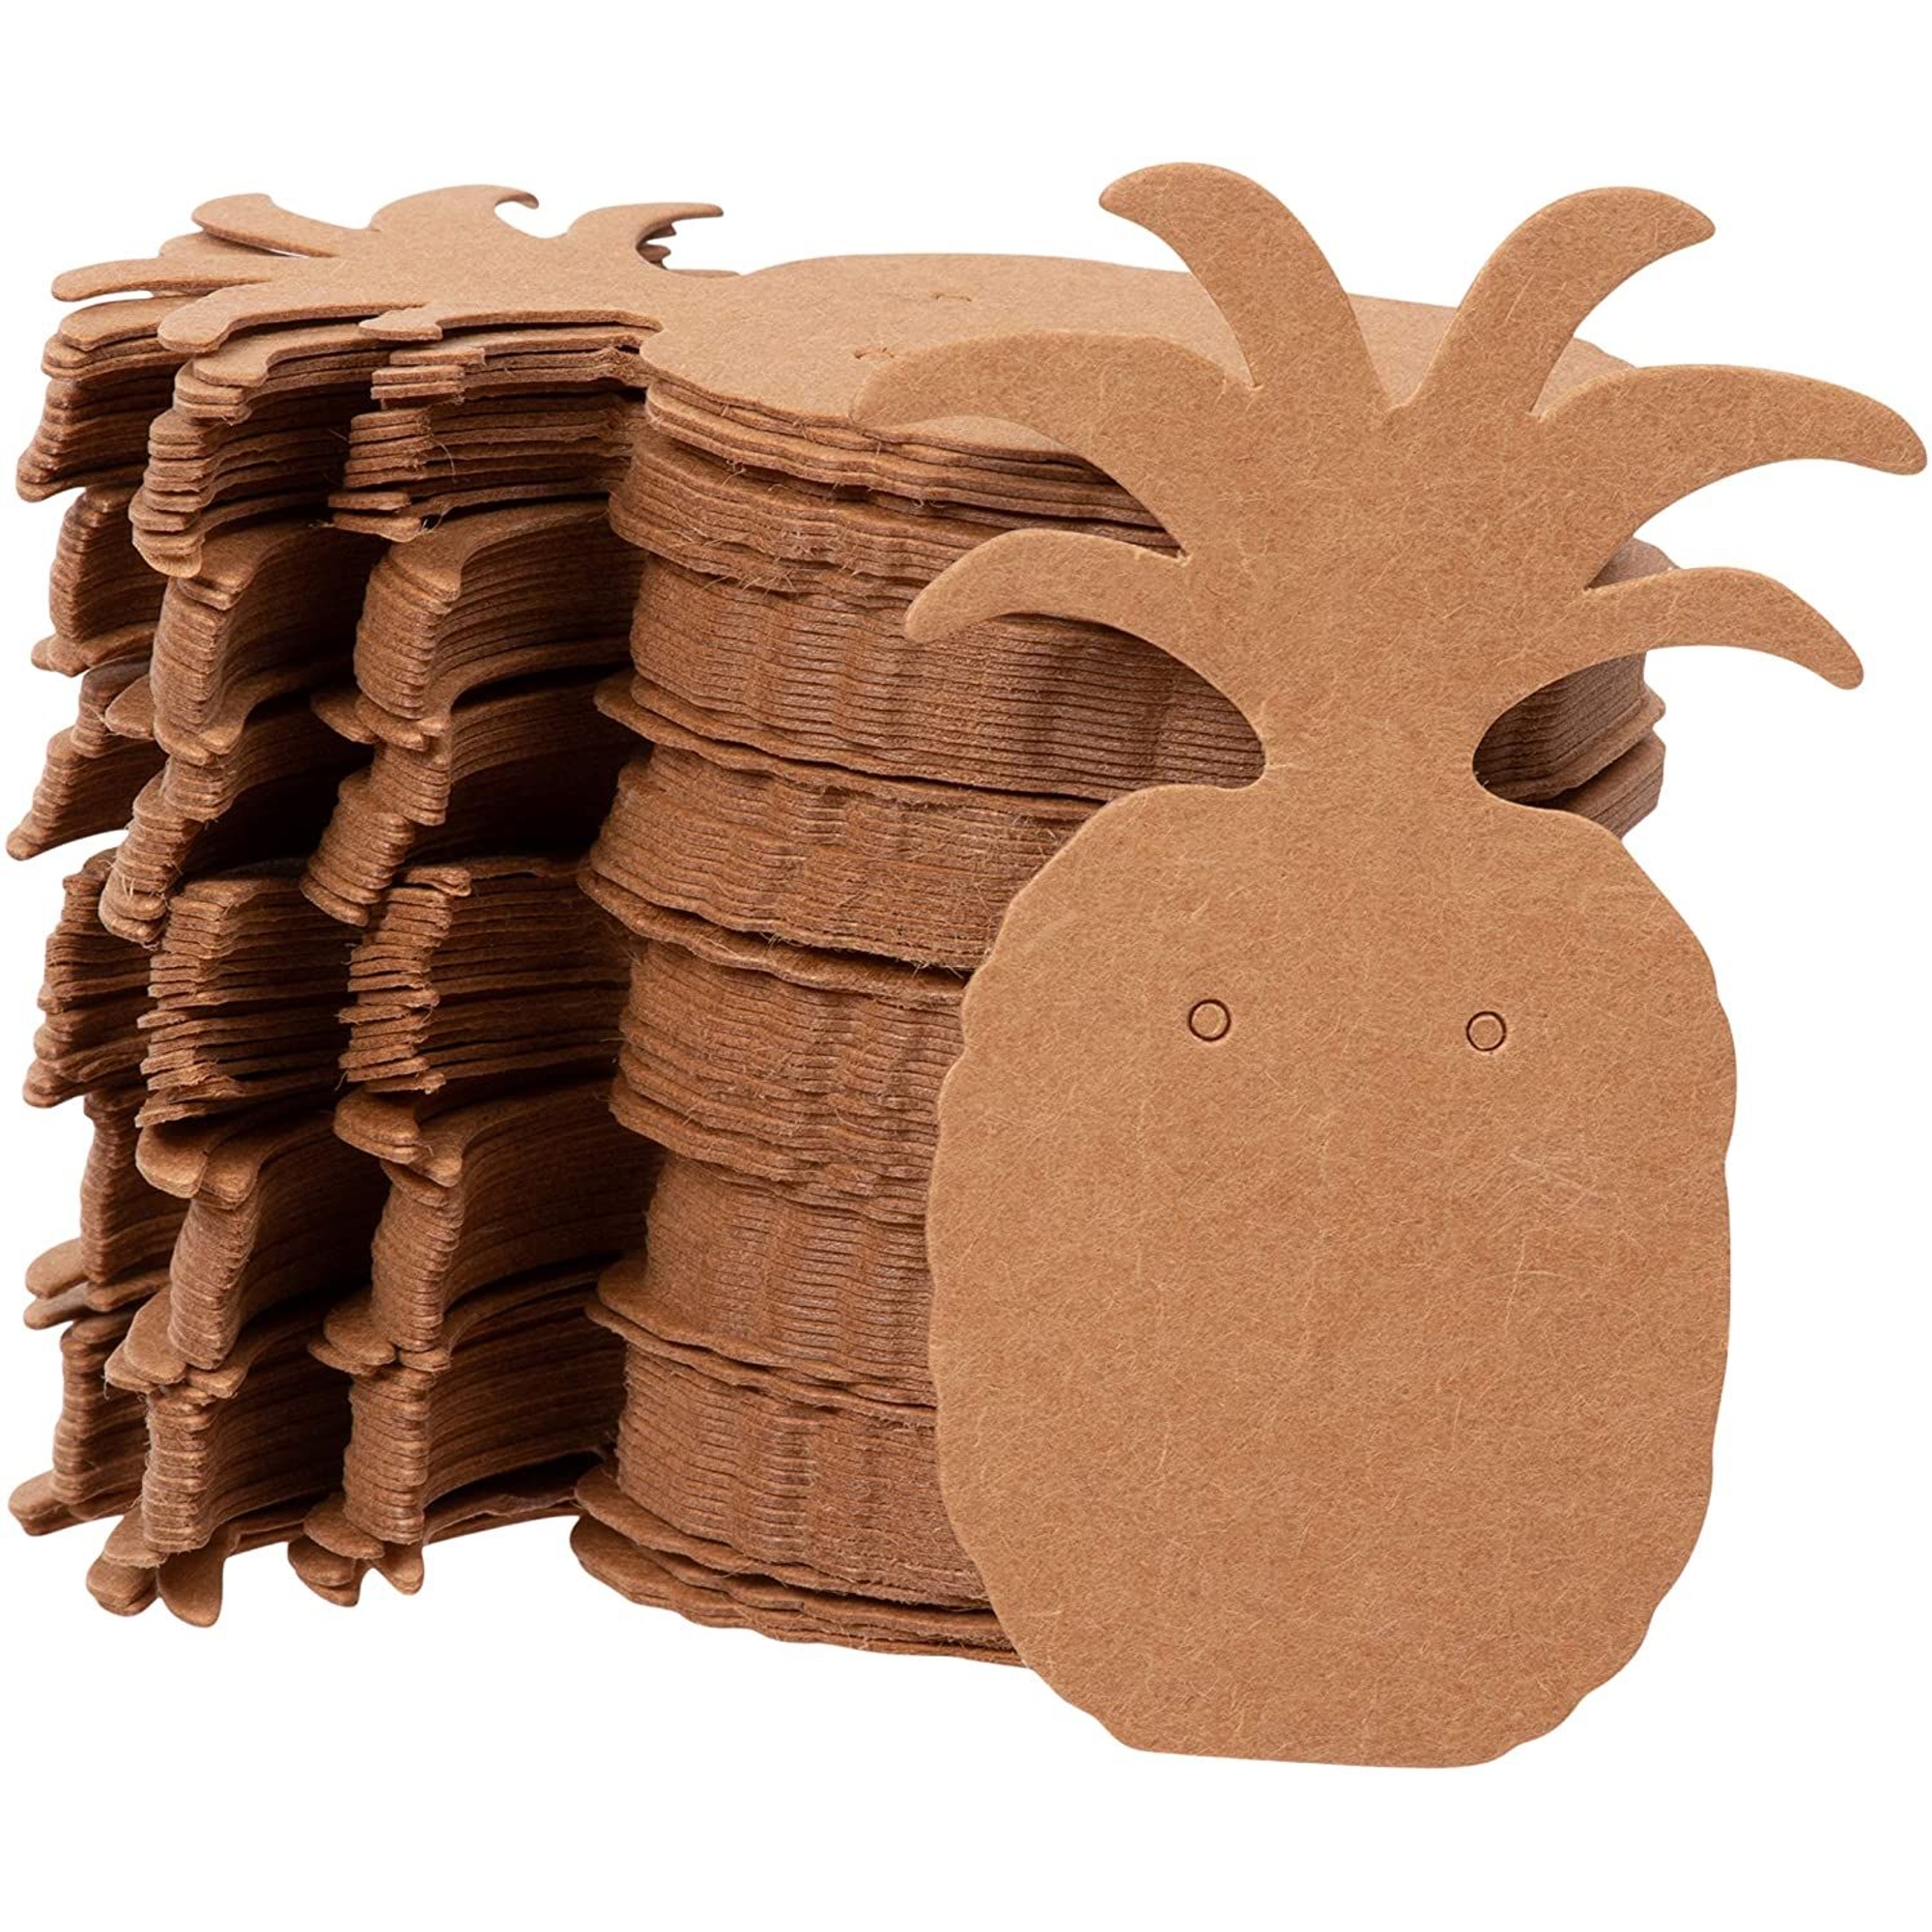 Earring Cards - 300-Pack Earring Card Holder, Pineapple Shaped Kraft Paper  Jewelry Display Cards for Earrings, Ear Studs, Brown, 1.75 x 2.5 Inches